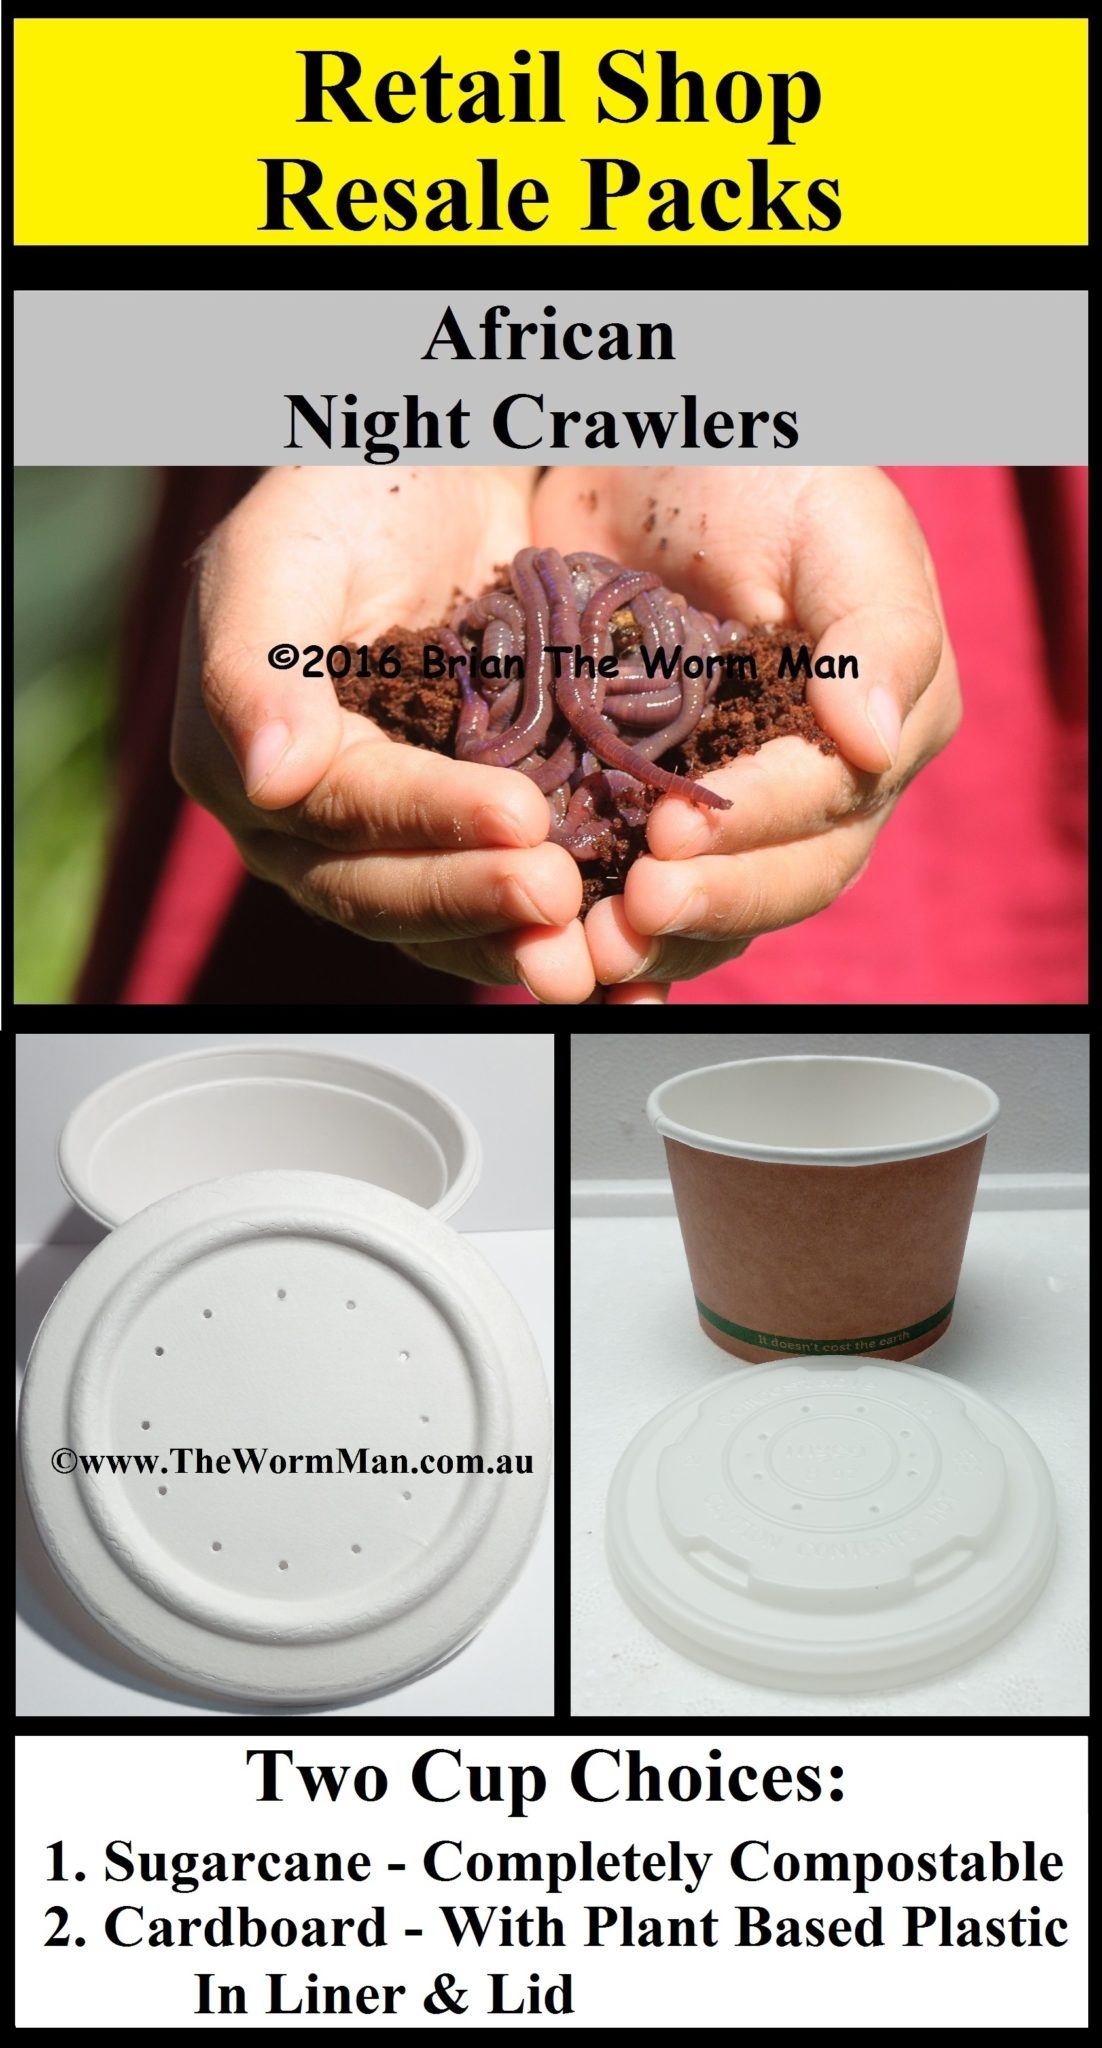 https://thewormman.com.au/wp-content/uploads/2019/01/Bait-Shop-Resale-Packs-3-African-Night-Crawlers-Worms-For-Fishing-Bait-Two-Cup-Choices-Compostable-Cup-The-Worm-Man.jpg